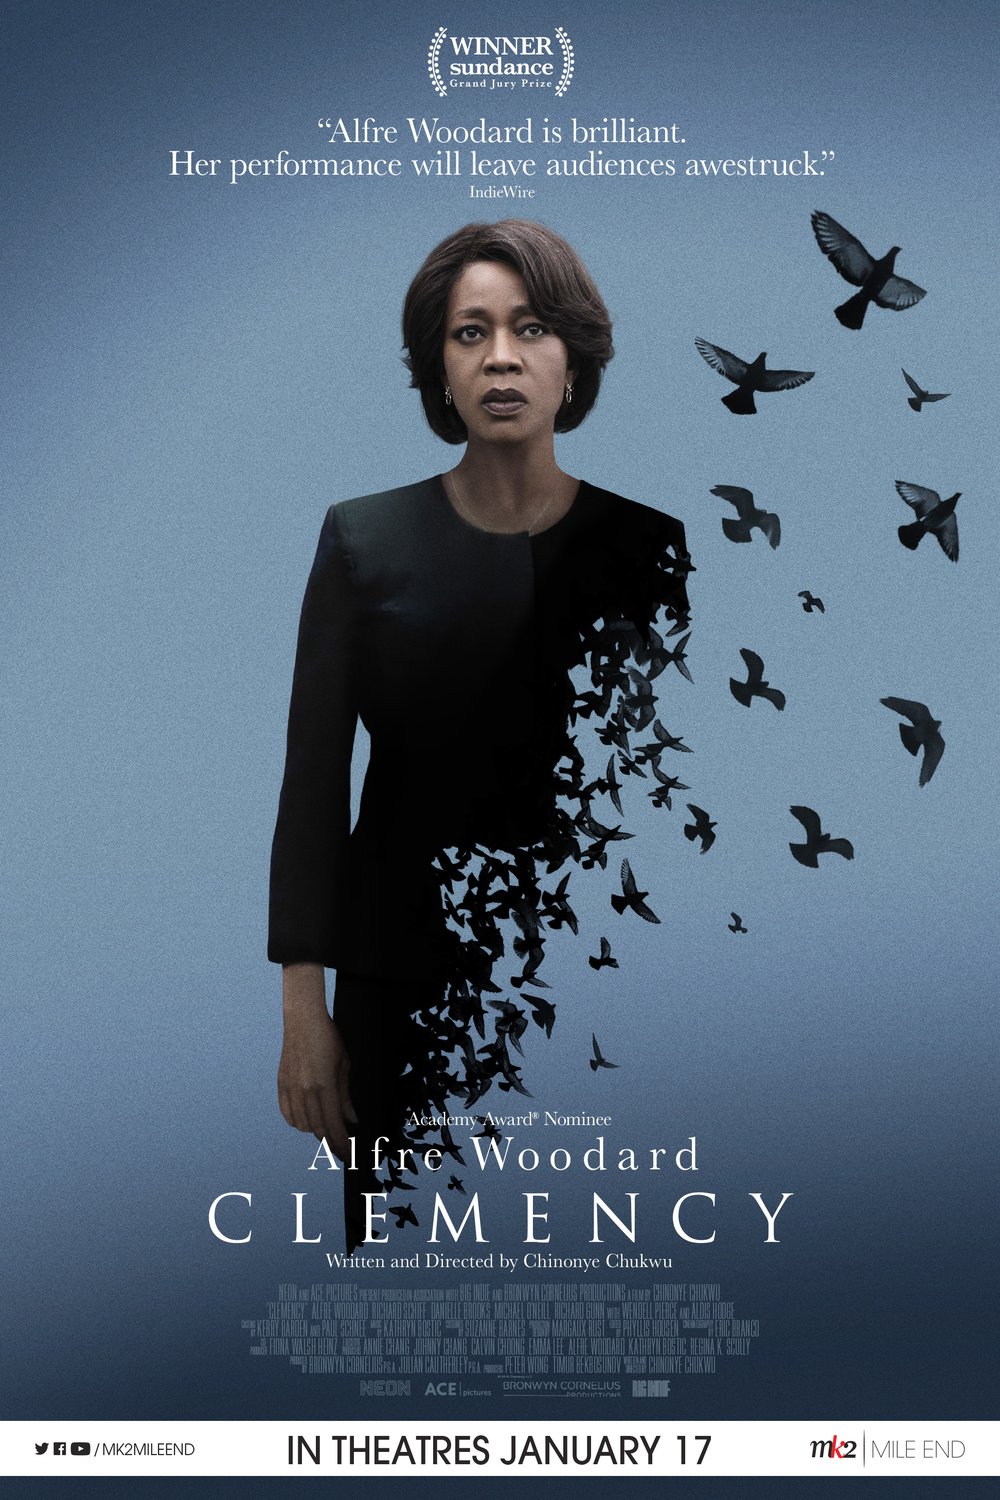 Poster of the movie Clemency